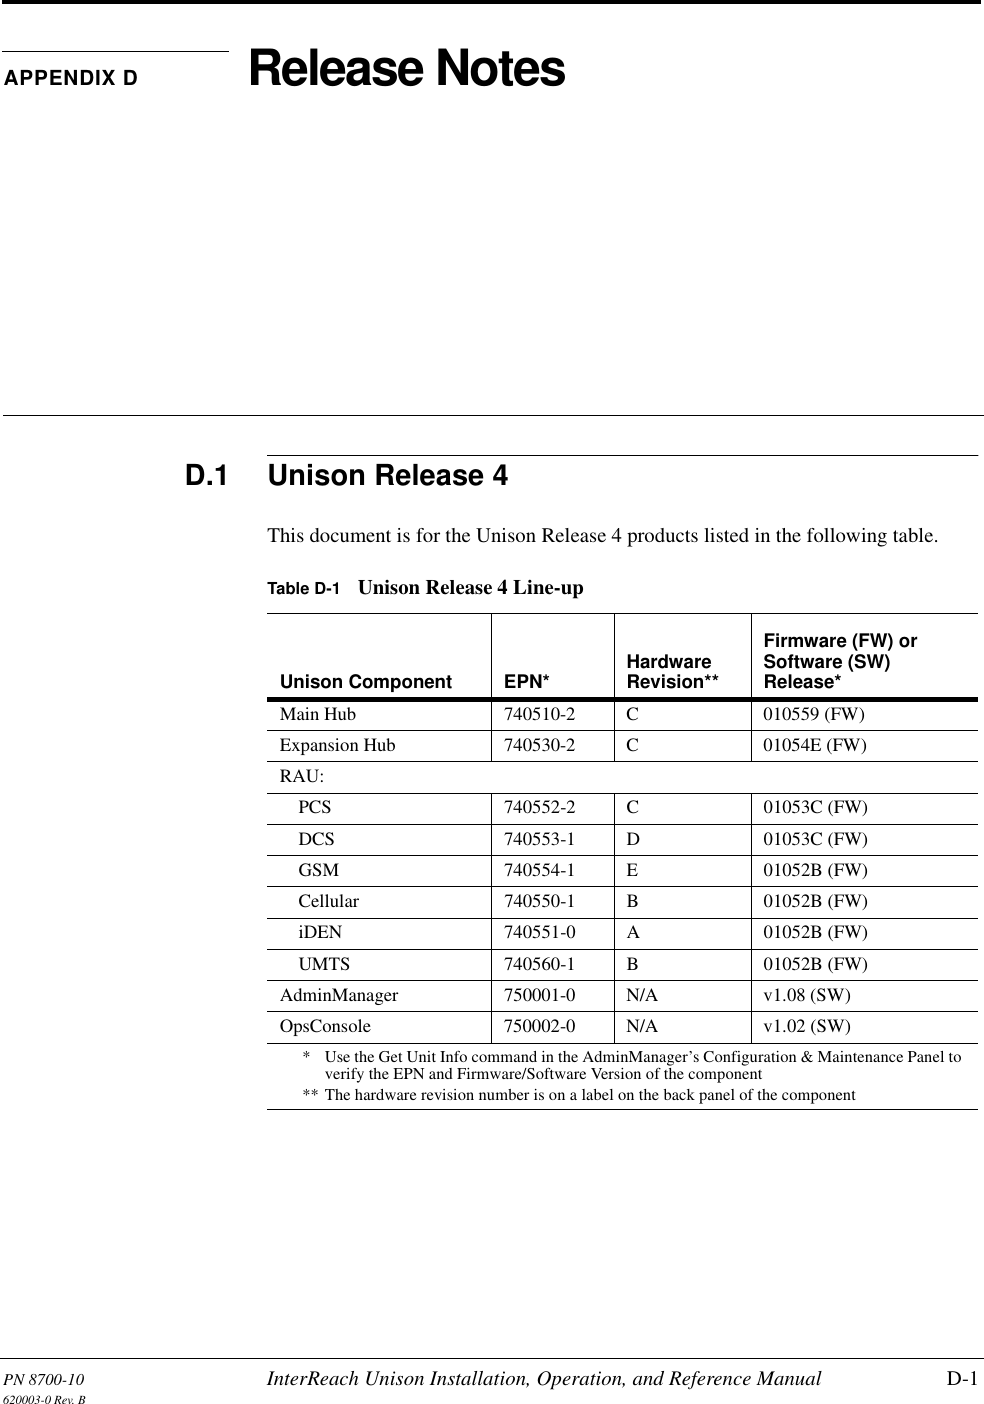 PN 8700-10 InterReach Unison Installation, Operation, and Reference Manual D-1620003-0 Rev. BAPPENDIX D Release NotesD.1 Unison Release 4This document is for the Unison Release 4 products listed in the following table.Table D-1 Unison Release 4 Line-upUnison Component EPN* Hardware Revision**Firmware (FW) or Software (SW) Release*Main Hub 740510-2 C 010559 (FW)Expansion Hub 740530-2 C 01054E (FW)RAU:PCS 740552-2 C 01053C (FW)DCS 740553-1 D 01053C (FW)GSM 740554-1 E 01052B (FW)Cellular 740550-1 B 01052B (FW)iDEN 740551-0 A 01052B (FW)UMTS 740560-1 B 01052B (FW)AdminManager 750001-0 N/A v1.08 (SW)OpsConsole 750002-0 N/A v1.02 (SW)*  Use the Get Unit Info command in the AdminManager’s Configuration &amp; Maintenance Panel to verify the EPN and Firmware/Software Version of the component** The hardware revision number is on a label on the back panel of the component